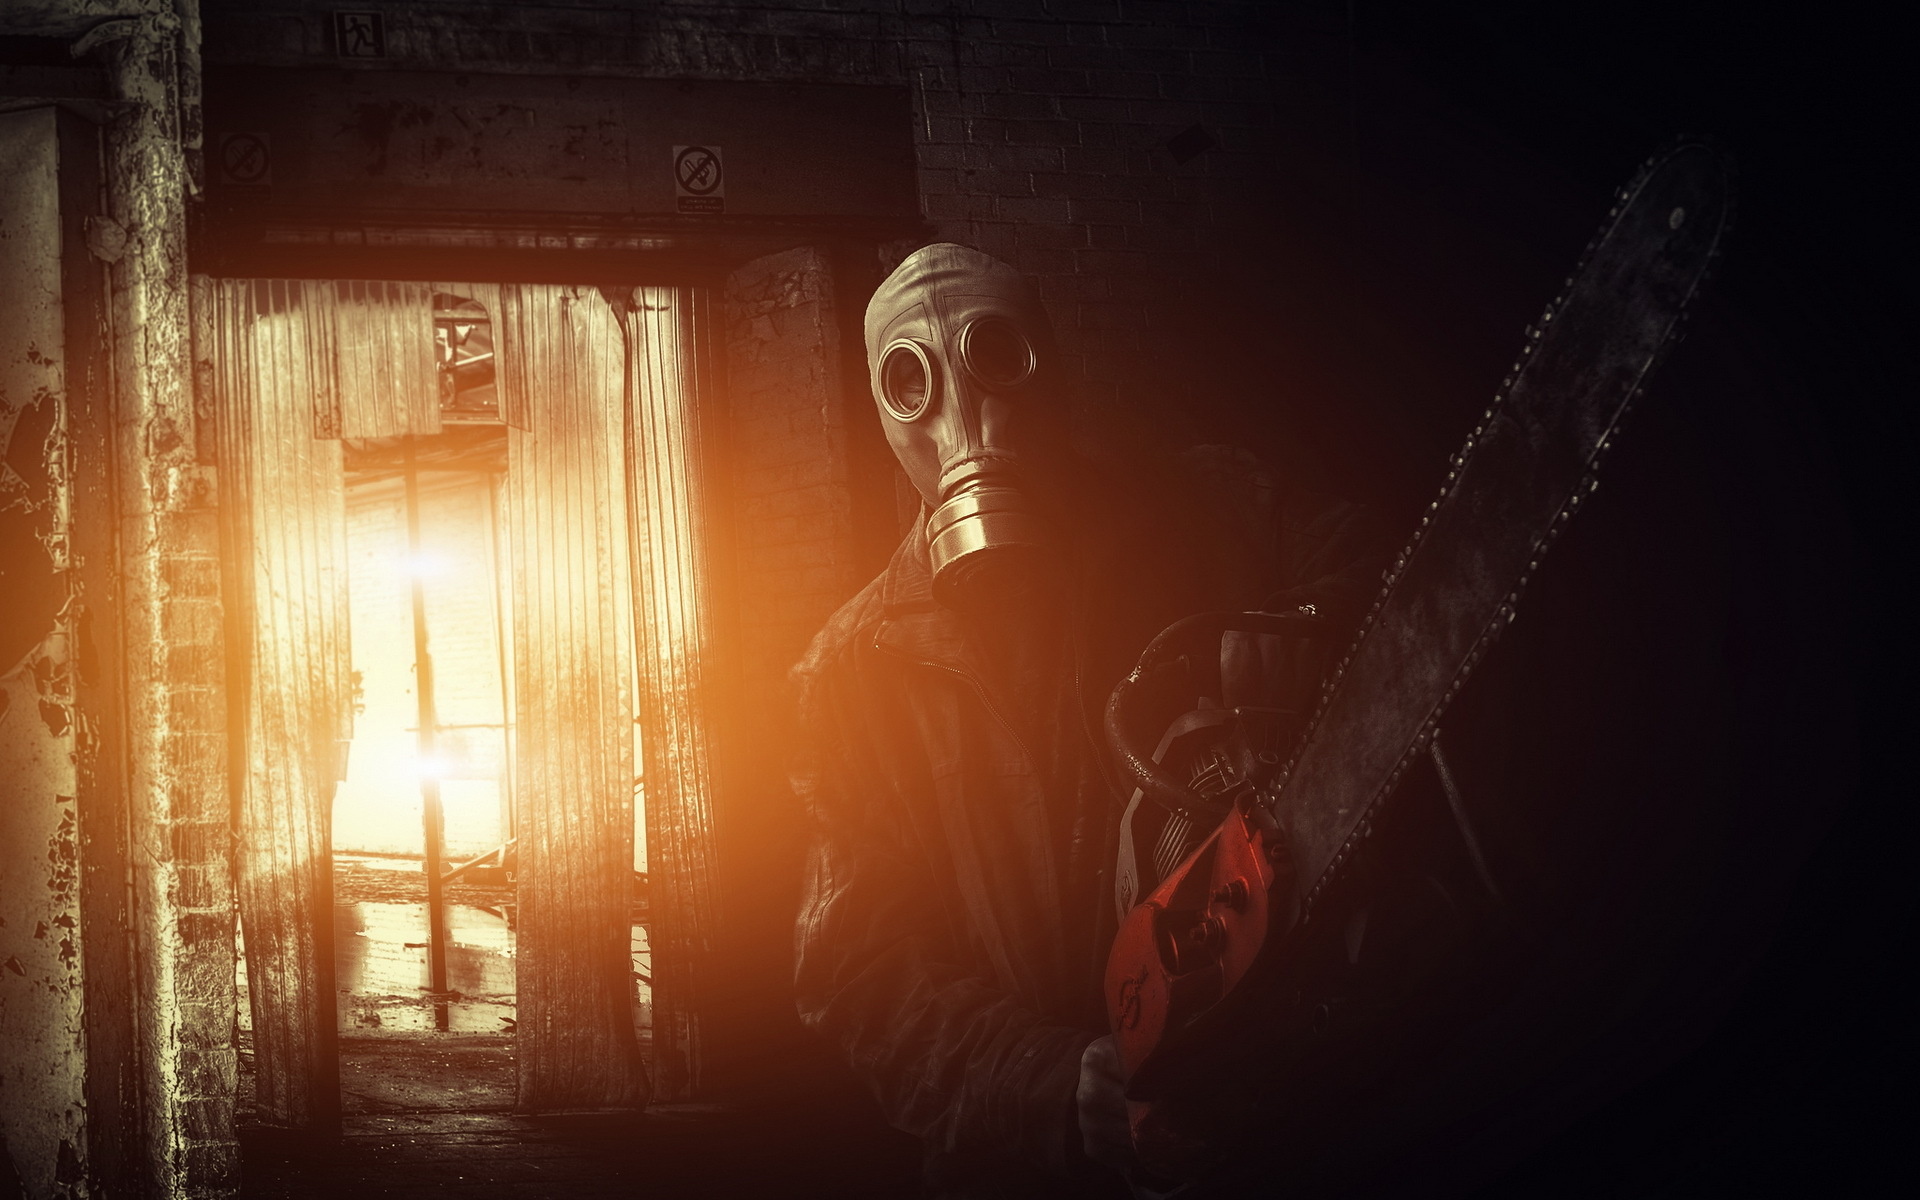 chainsaw, Gas, Mask, Horror, Apocalyptic Wallpaper